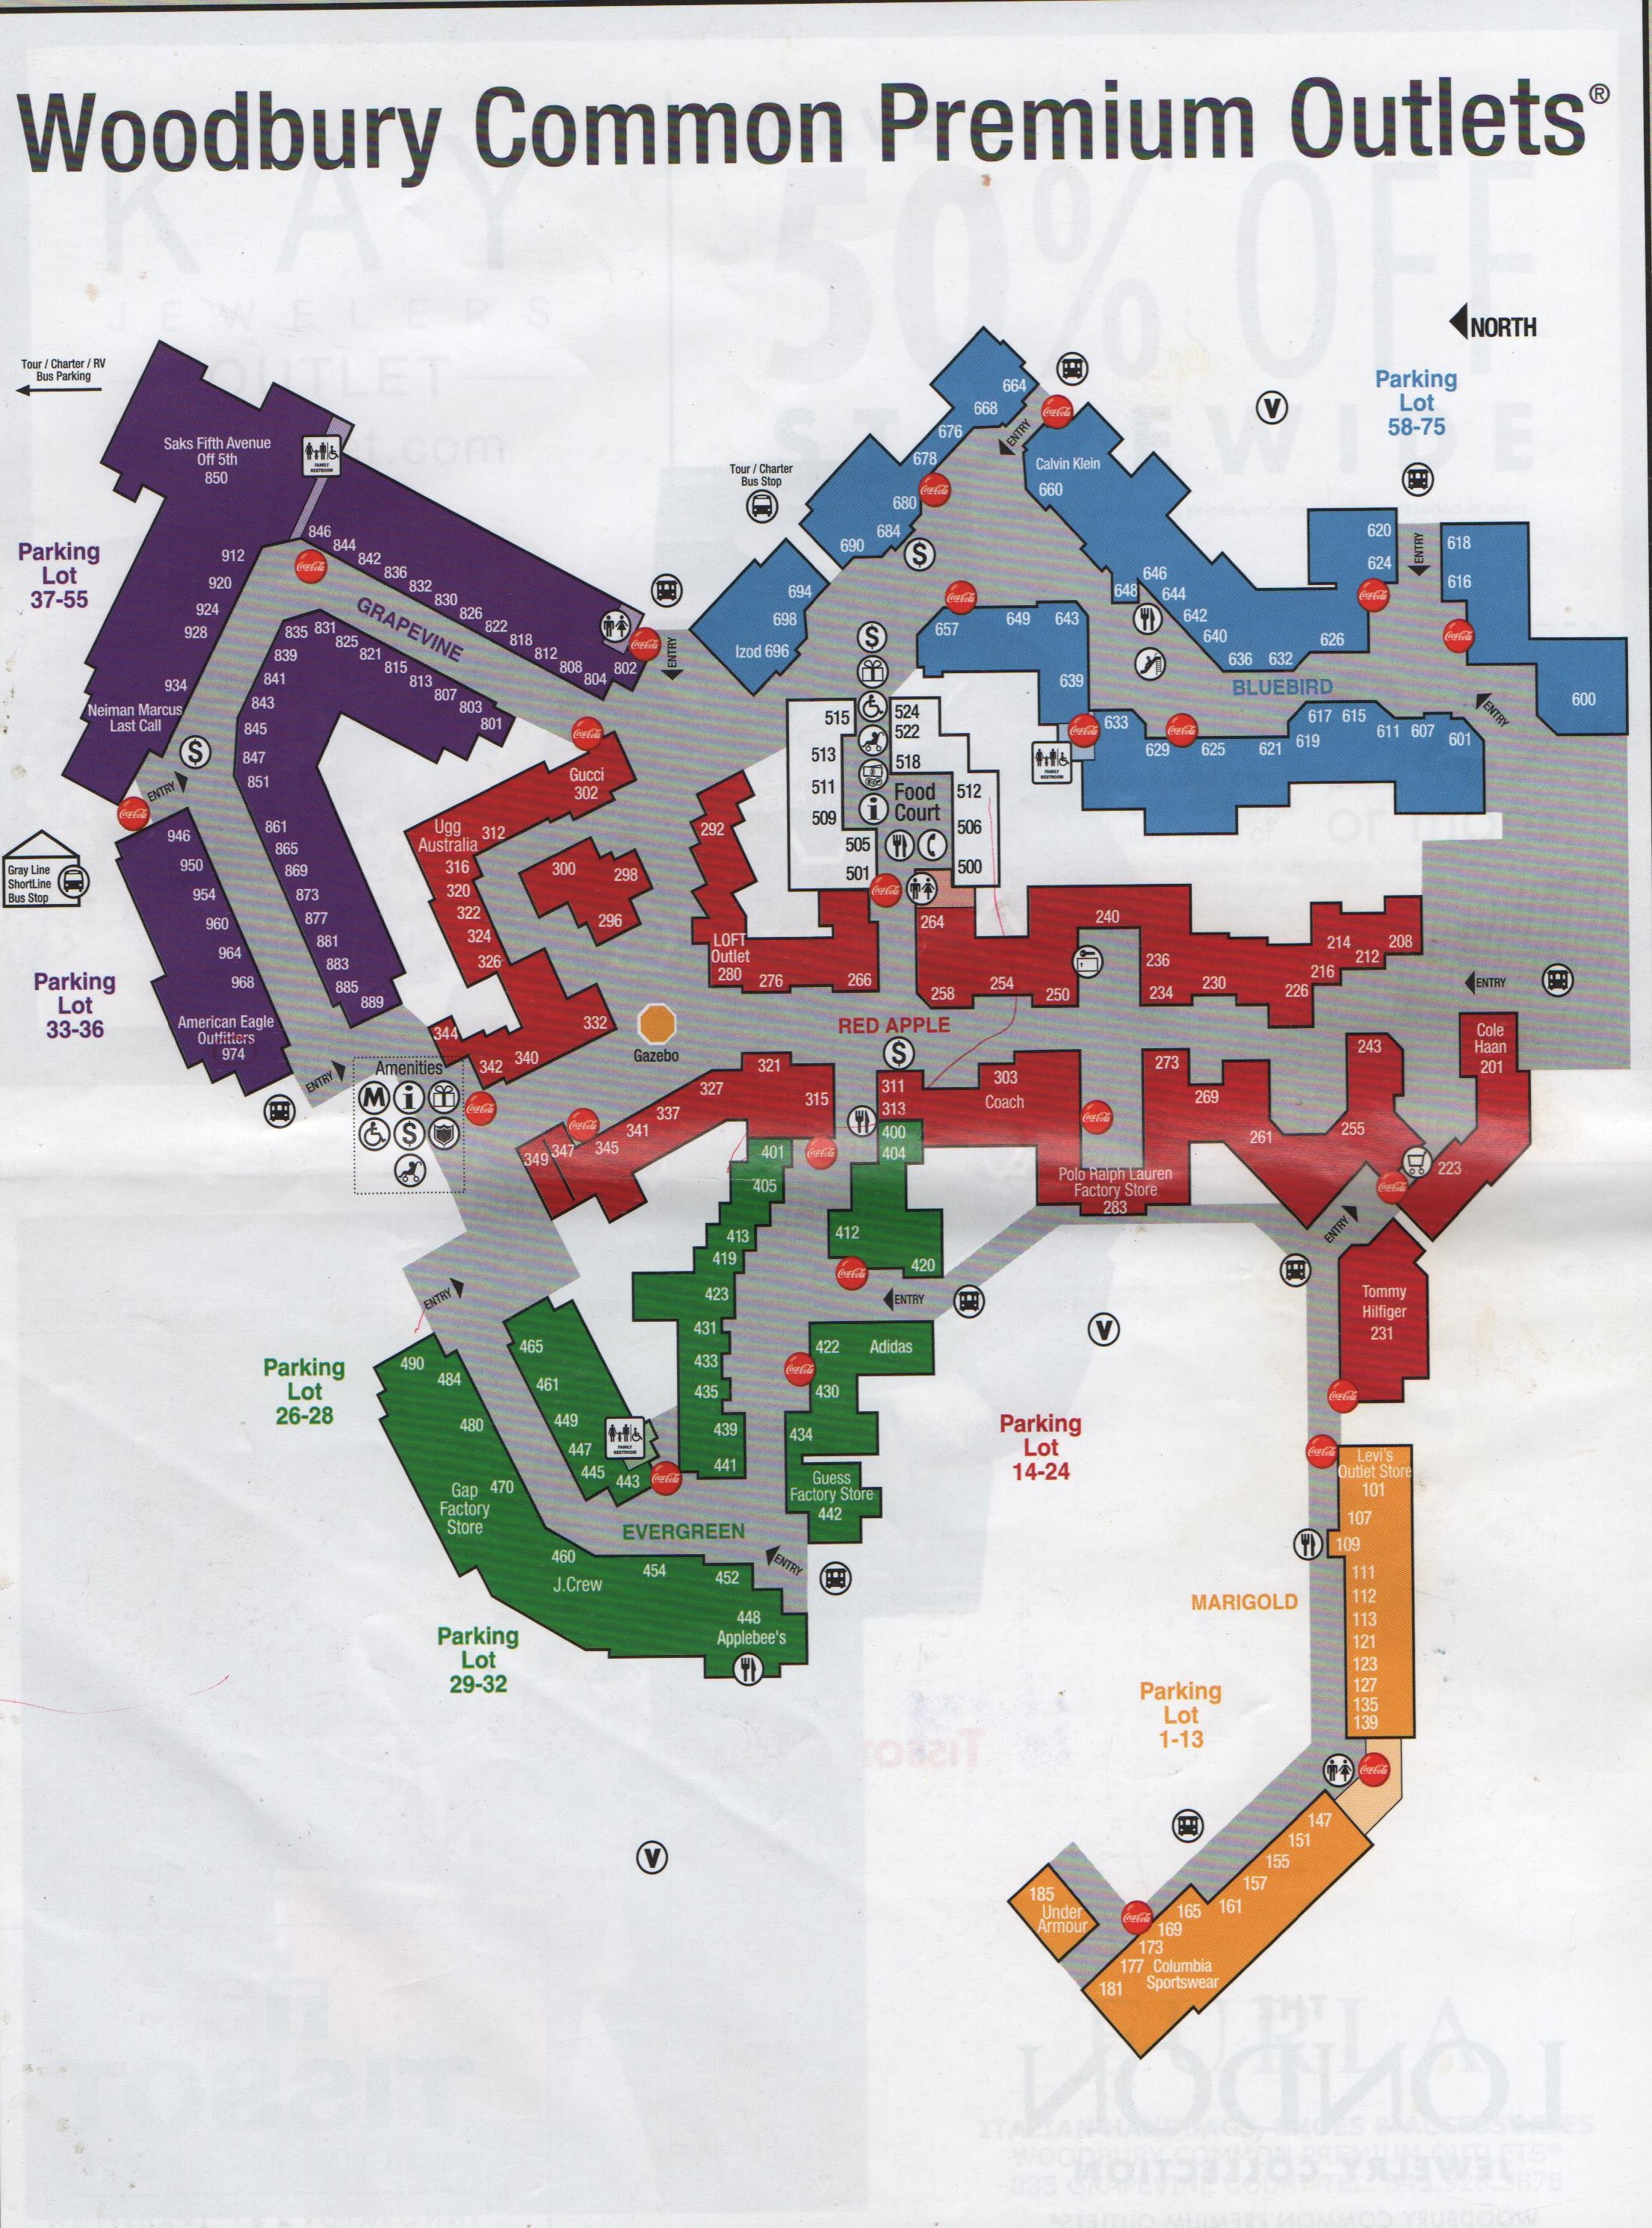 Woodbury Outlet Map New York New York Shopping – Woodbury Common Premium Outlets 